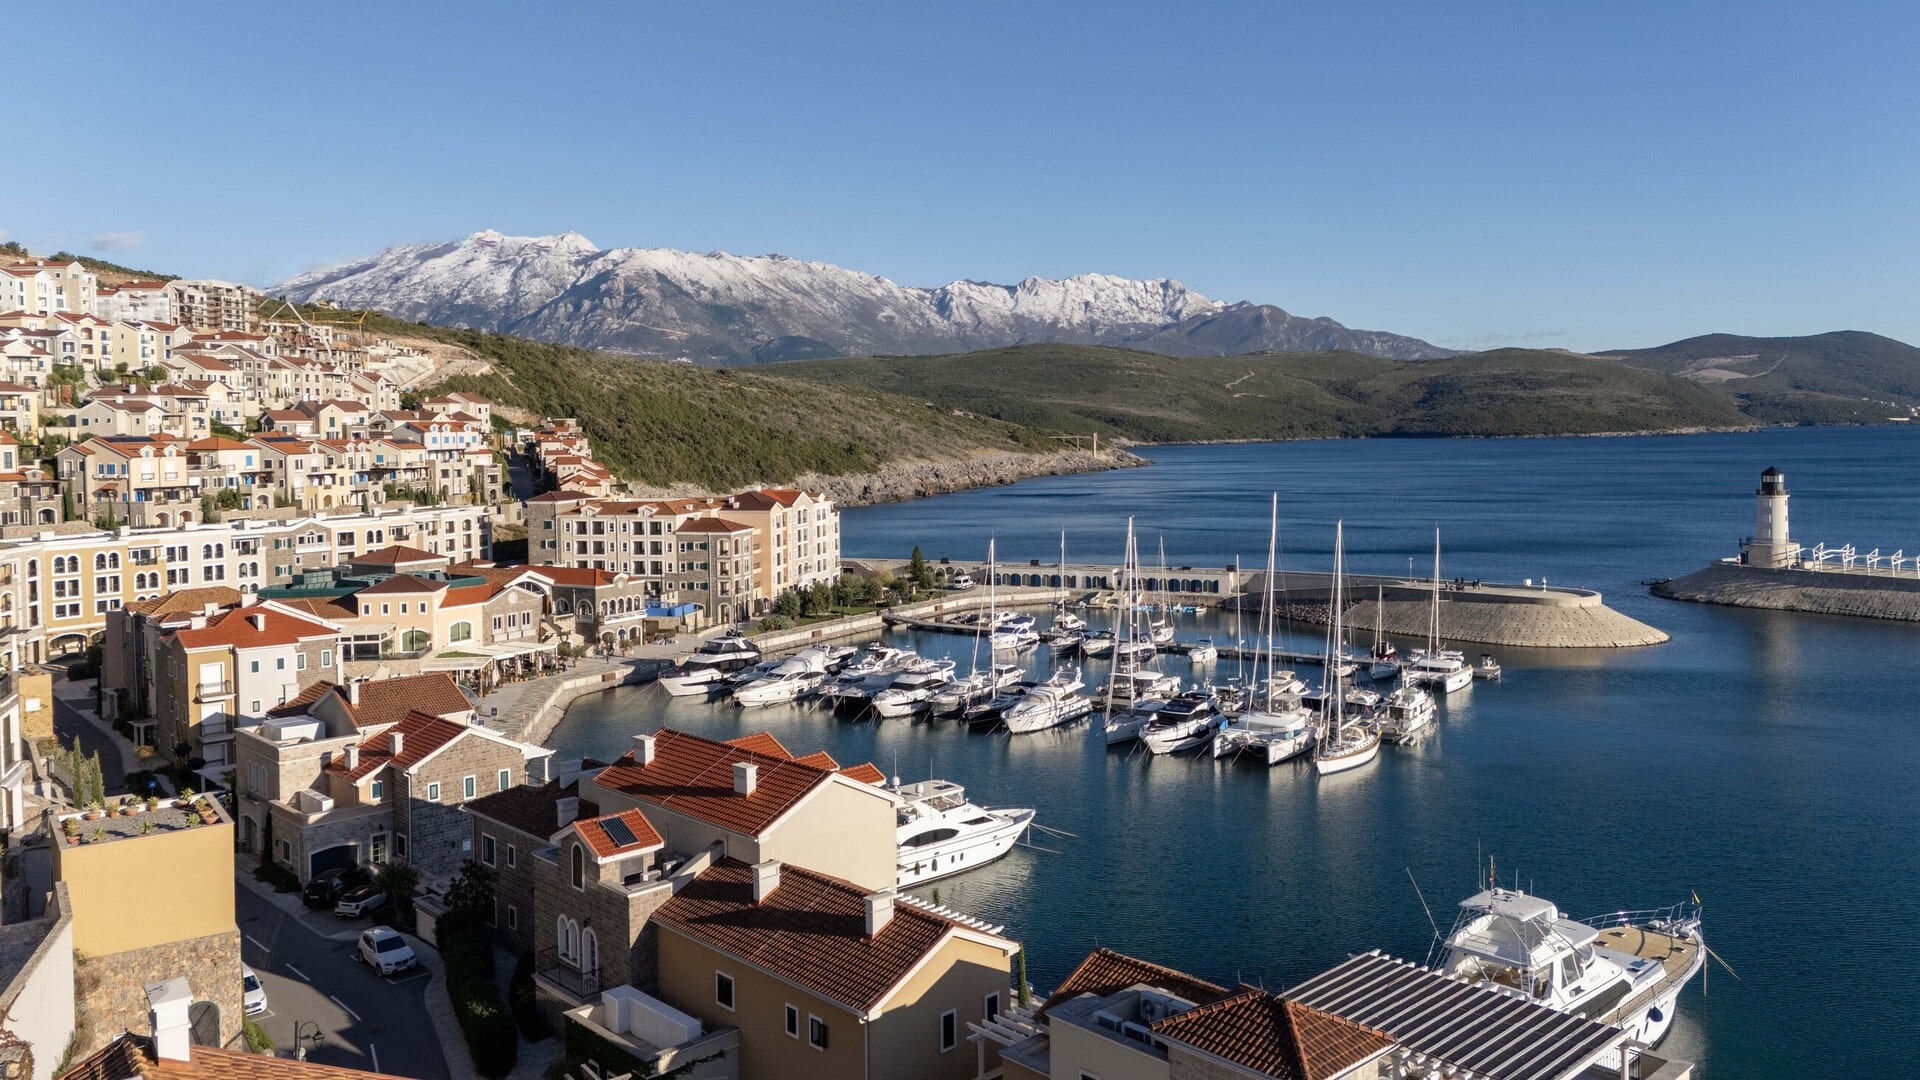 Tivat, Lustica Bay - furnished studio apartment with a spacious terrace and sea view, Marina Village